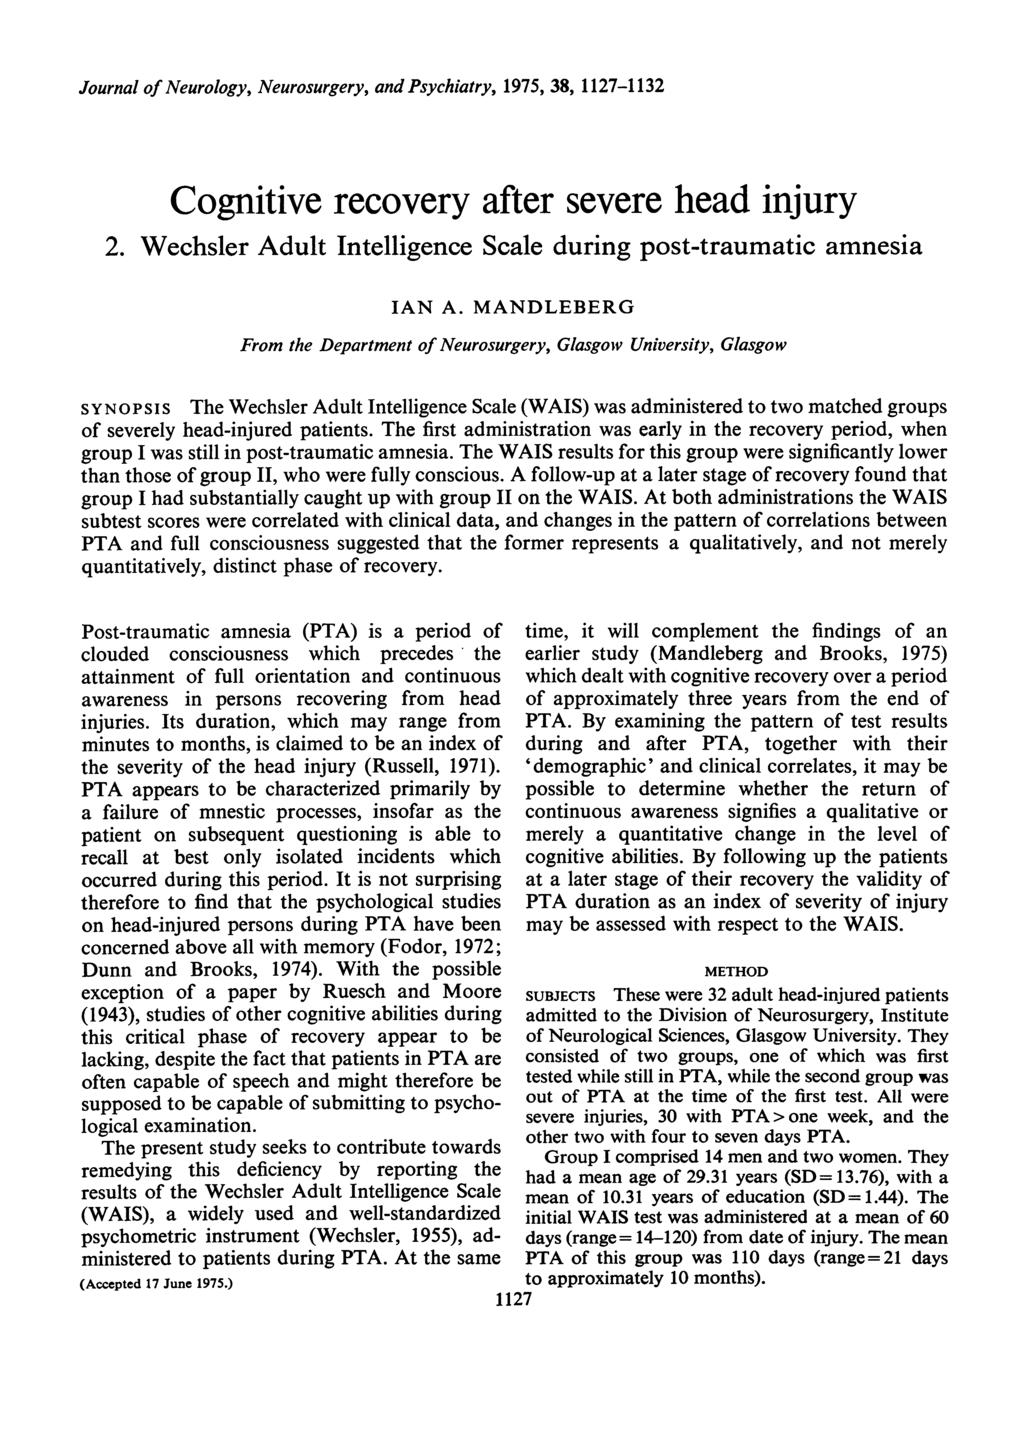 Journal of Neurology, Neurosurgery, and Psychiatry, 1975, 38, 1127-1132 Cognitive recovery after severe head injury 2. Wechsler Adult Intelligence Scale during post-traumatic amnesia IAN A.